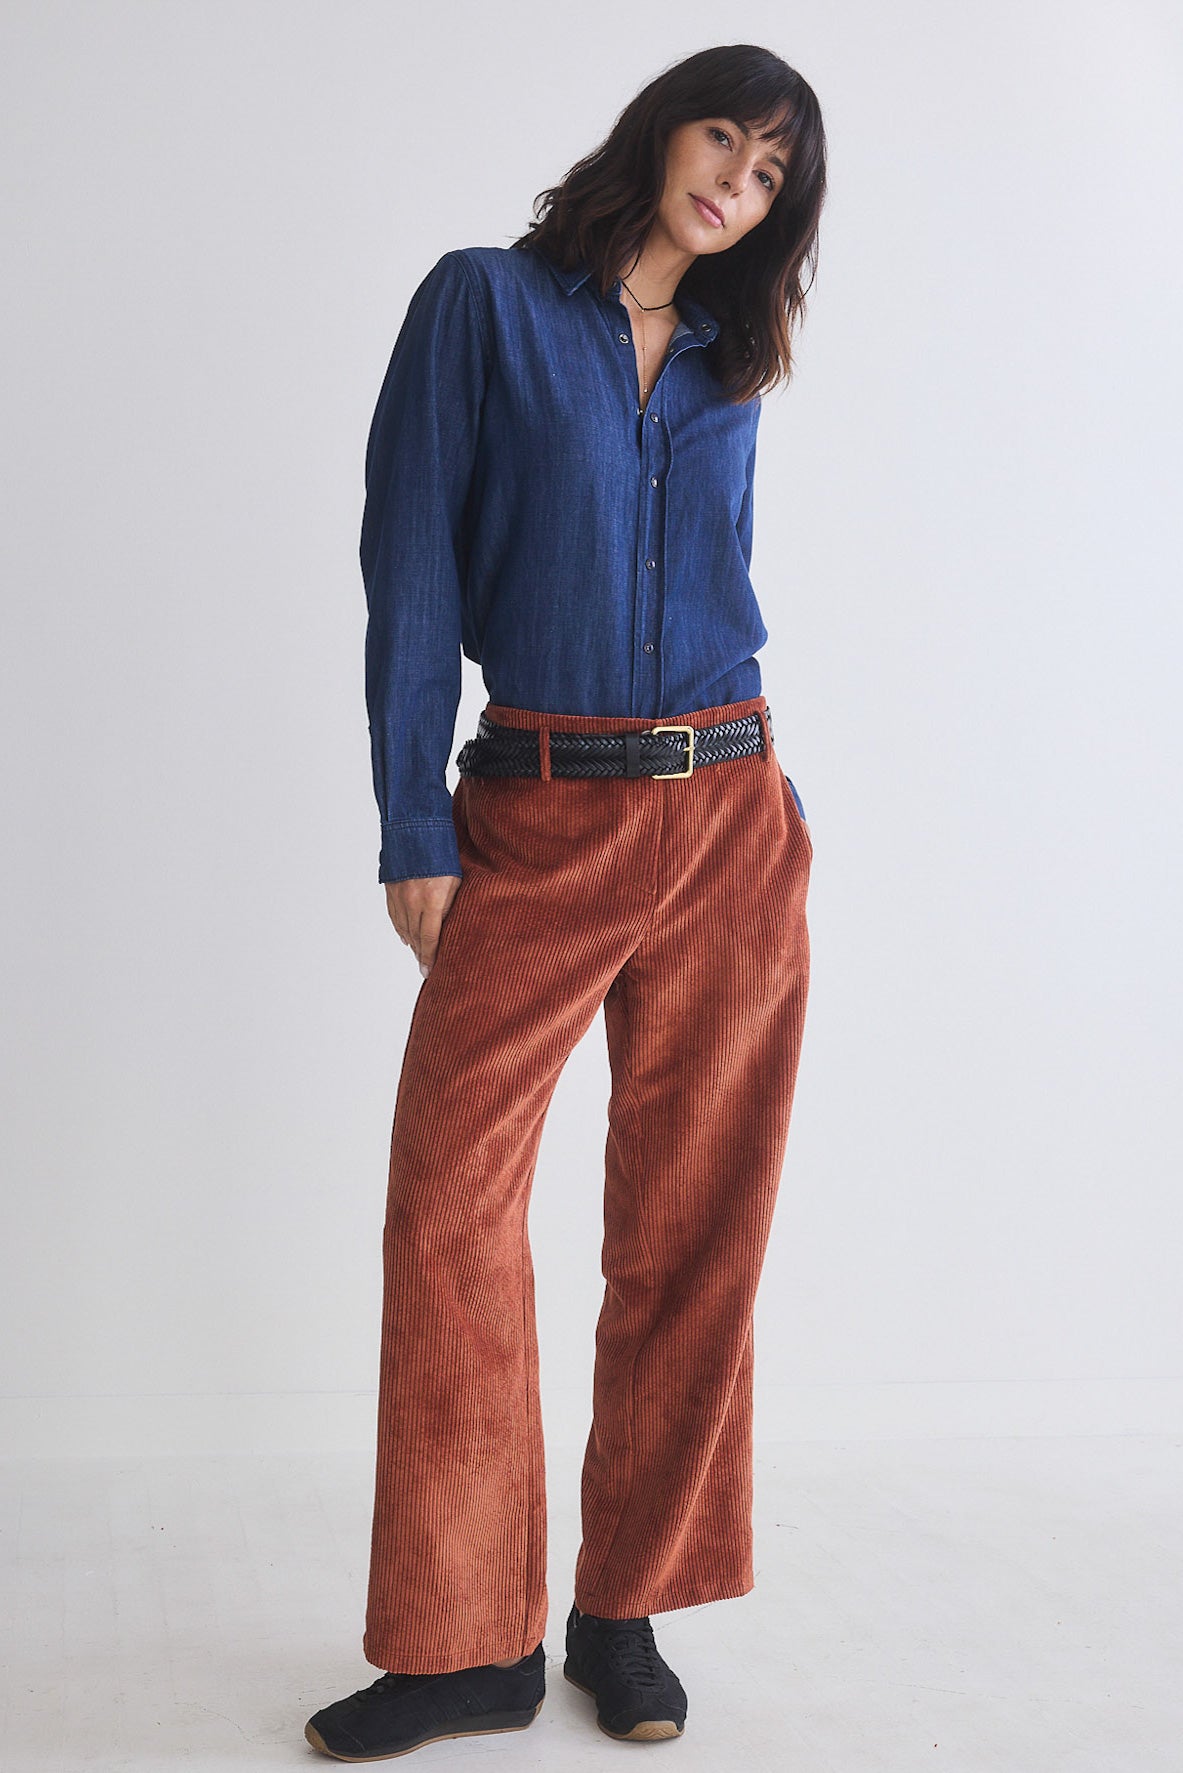 The Corduroy Pants from the 70s – Ruti